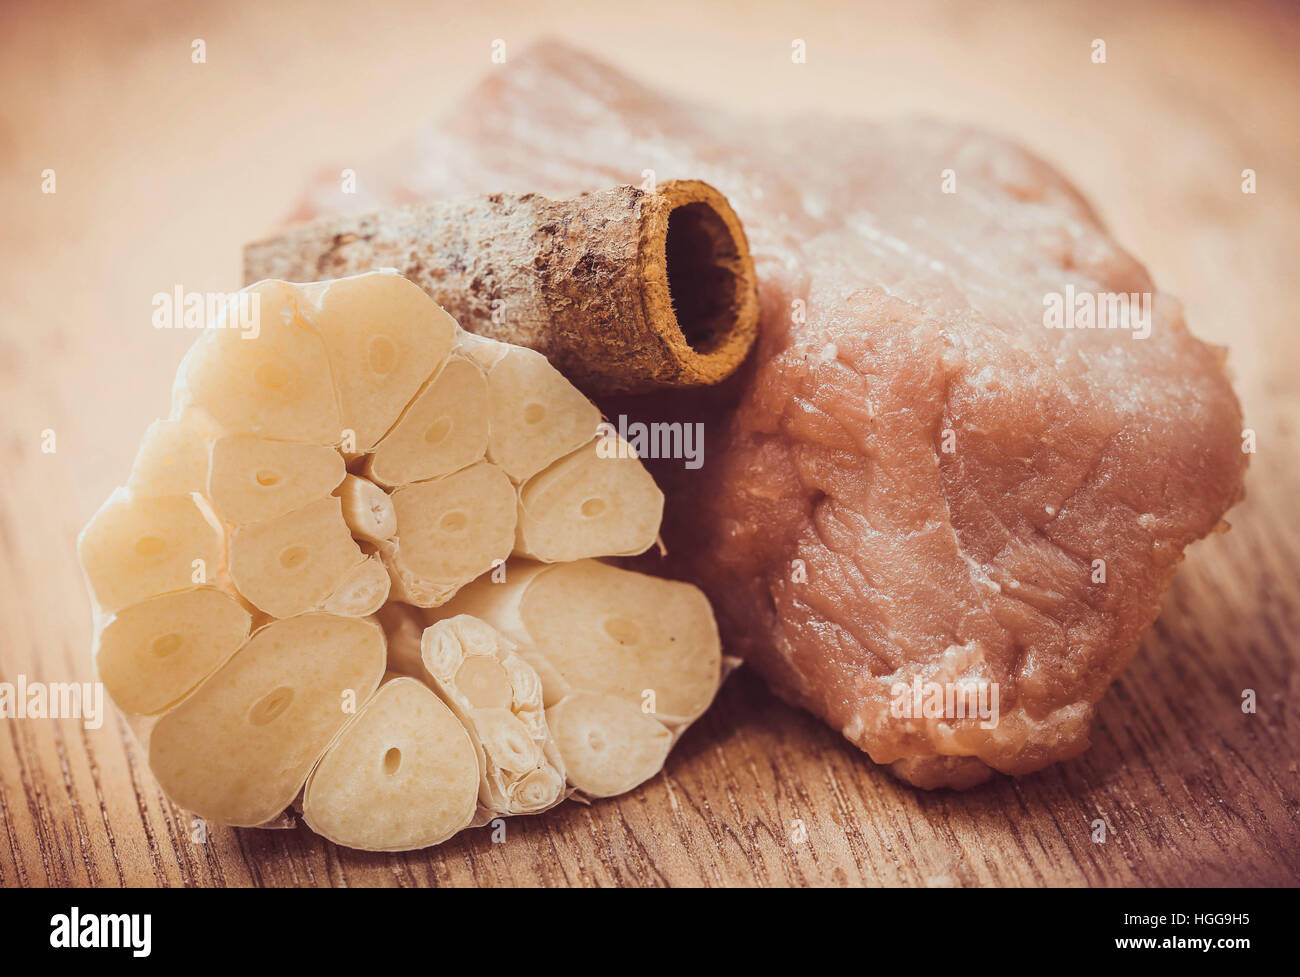 Raw beef with garlic and cinnamon on wooden surface Stock Photo